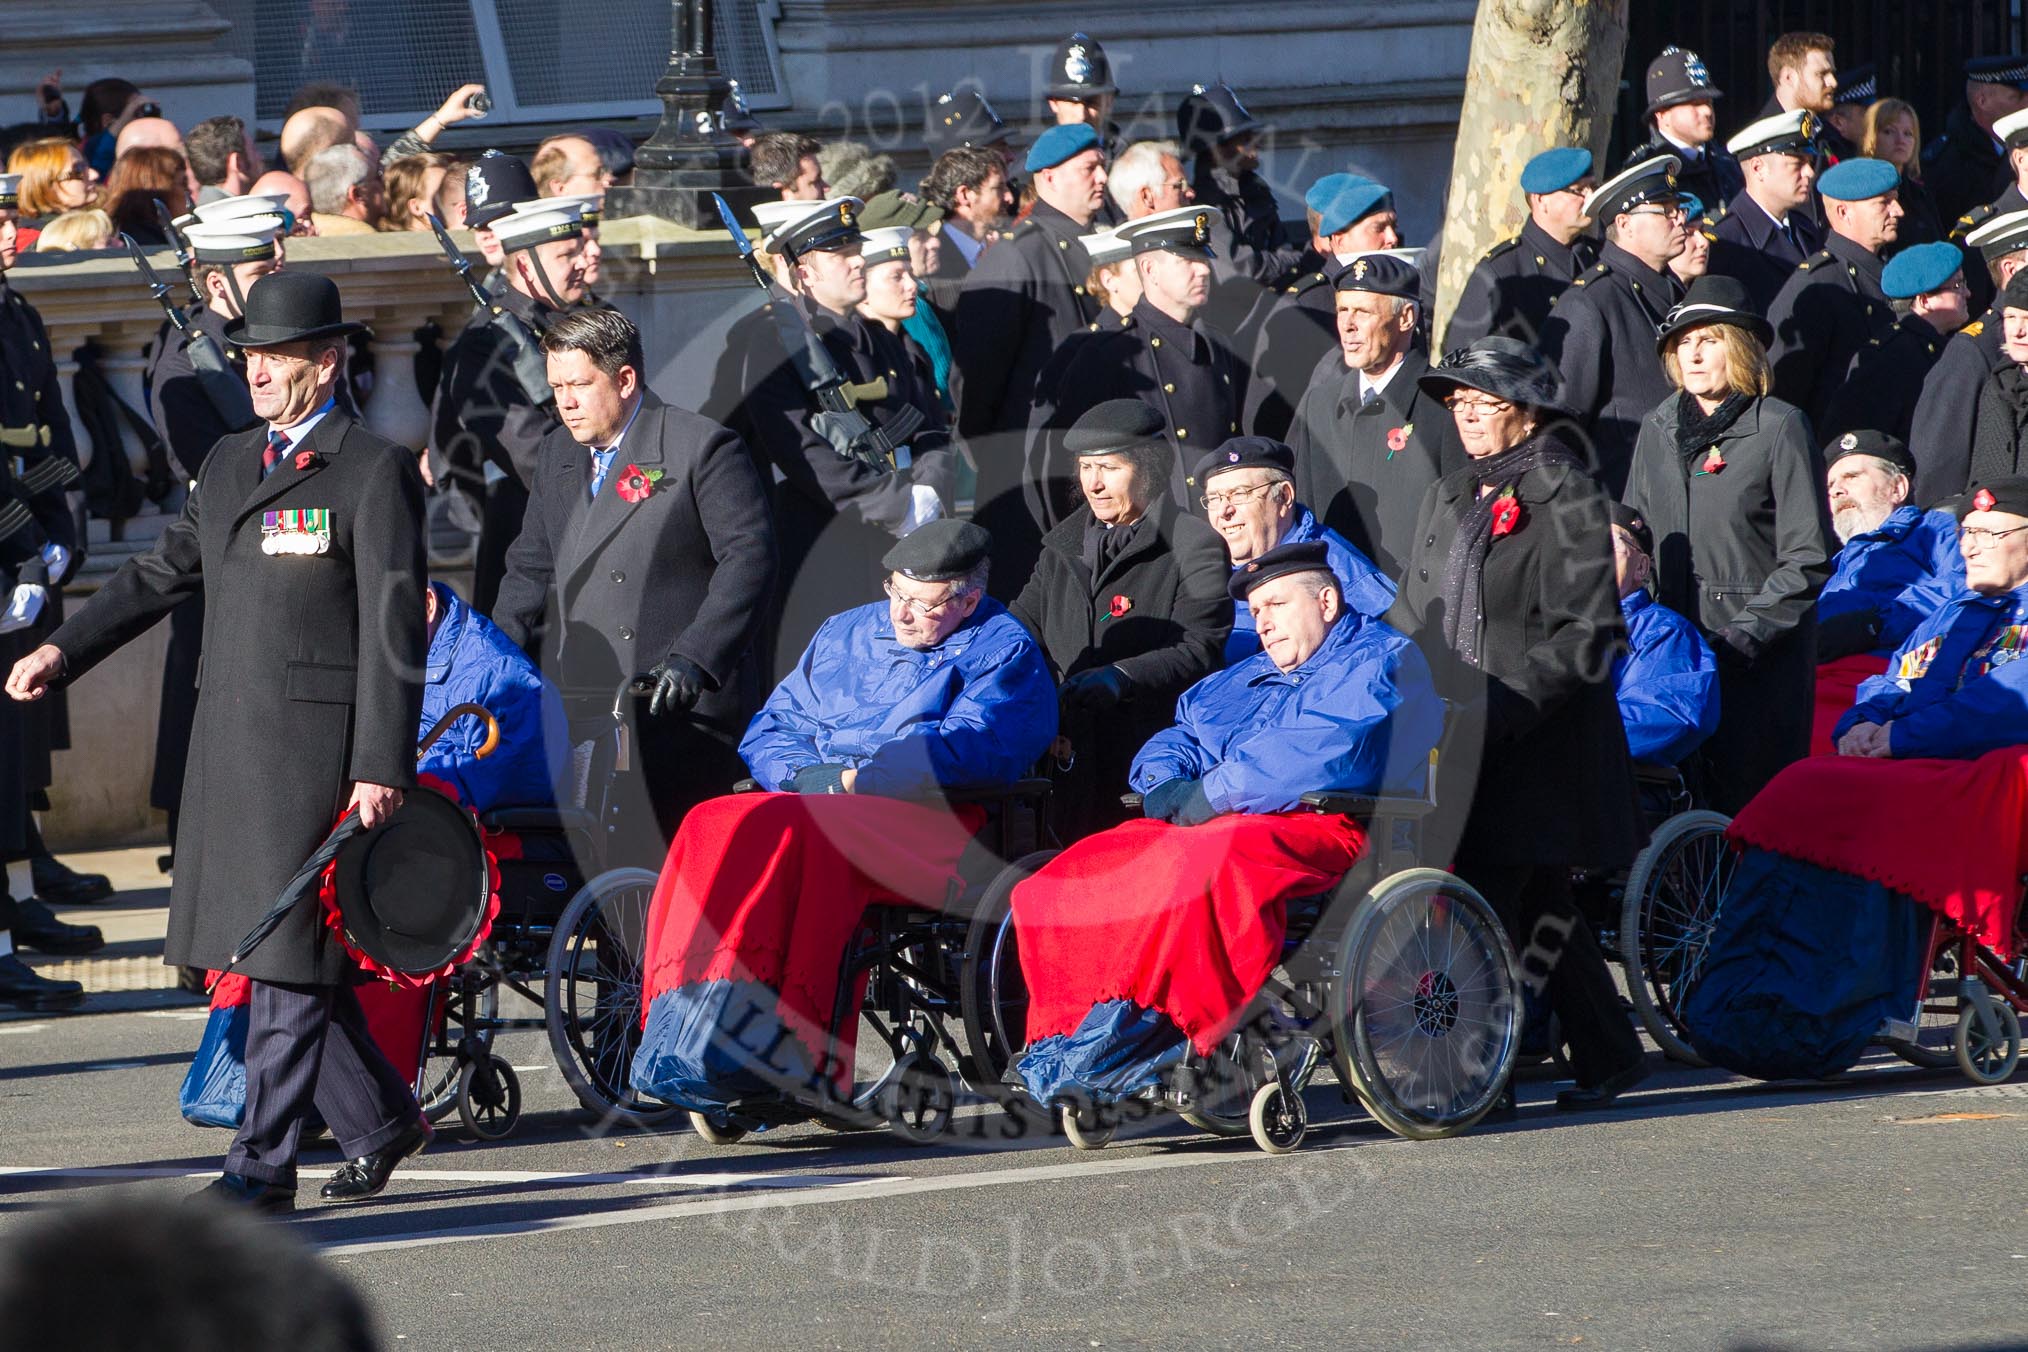 Remembrance Sunday 2012 Cenotaph March Past: Group E44 - Queen Alexandra's Hospital Home for Disabled Ex-Servicemen & Women..
Whitehall, Cenotaph,
London SW1,

United Kingdom,
on 11 November 2012 at 11:44, image #350